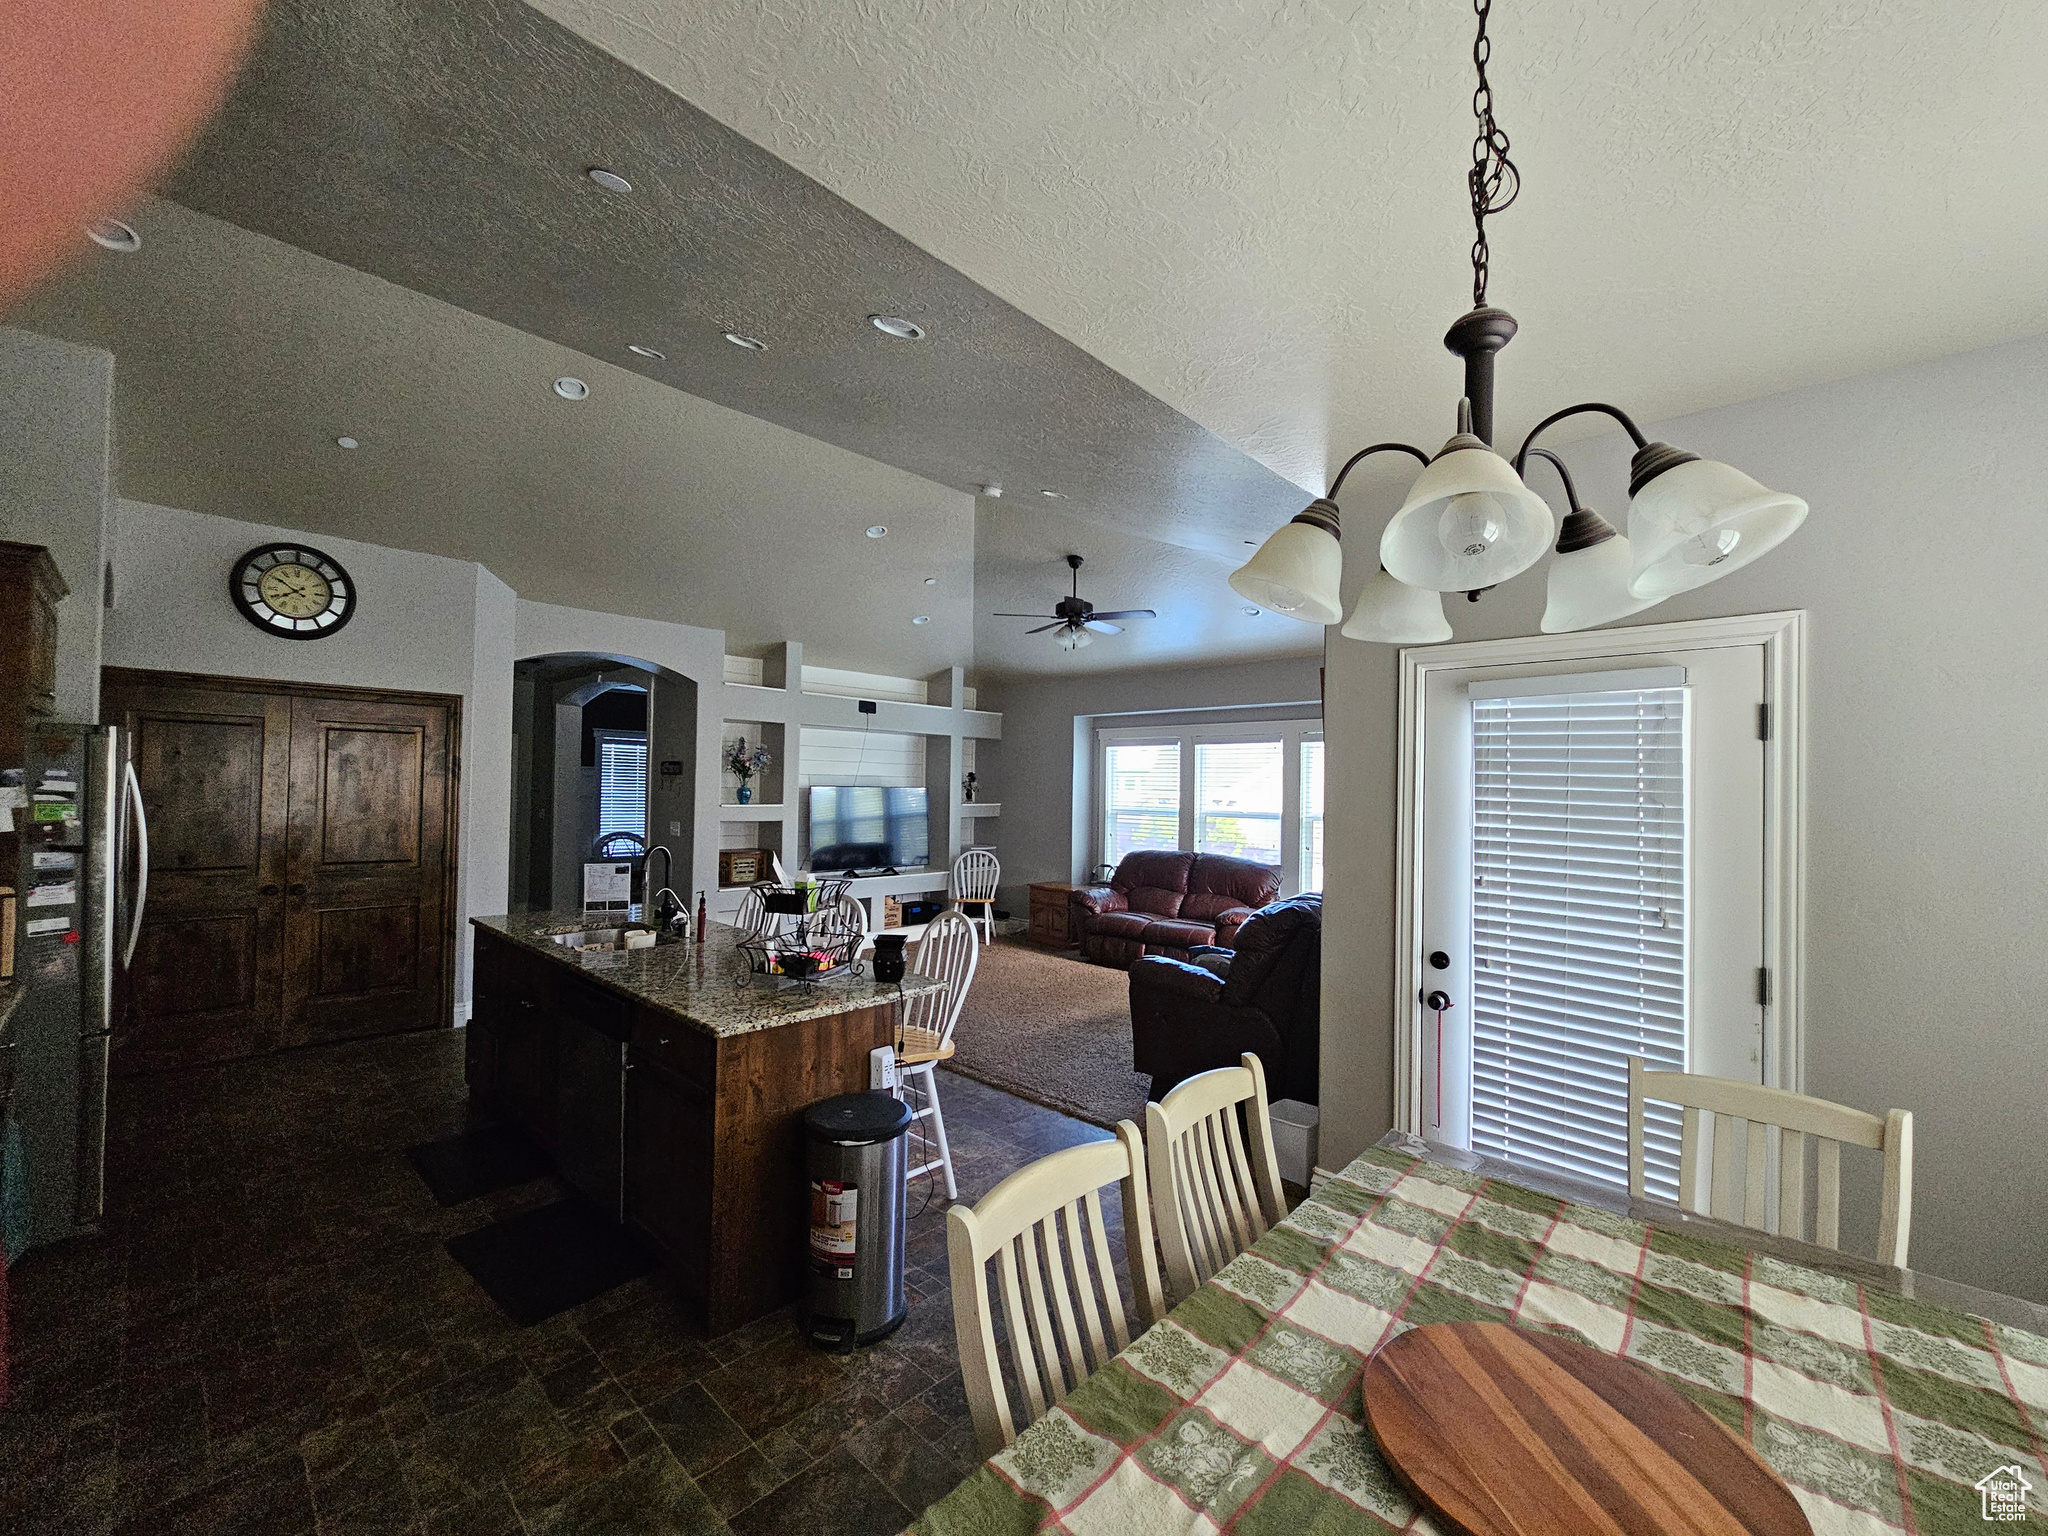 Dining room featuring a textured ceiling, sink, ceiling fan, and dark tile flooring